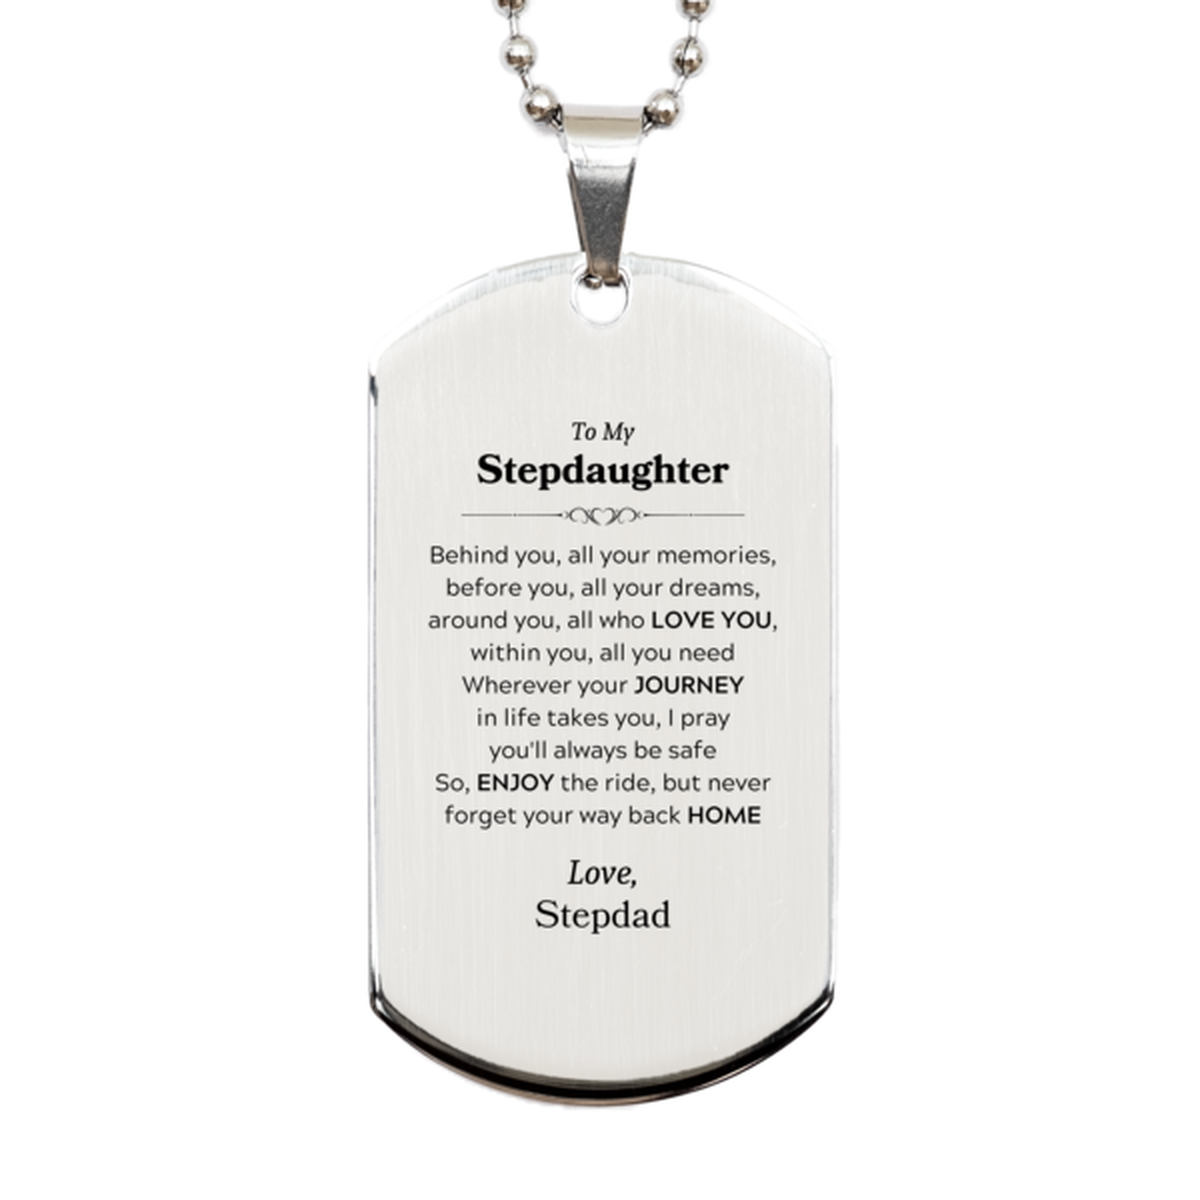 To My Stepdaughter Graduation Gifts from Stepdad, Stepdaughter Silver Dog Tag Christmas Birthday Gifts for Stepdaughter Behind you, all your memories, before you, all your dreams. Love, Stepdad